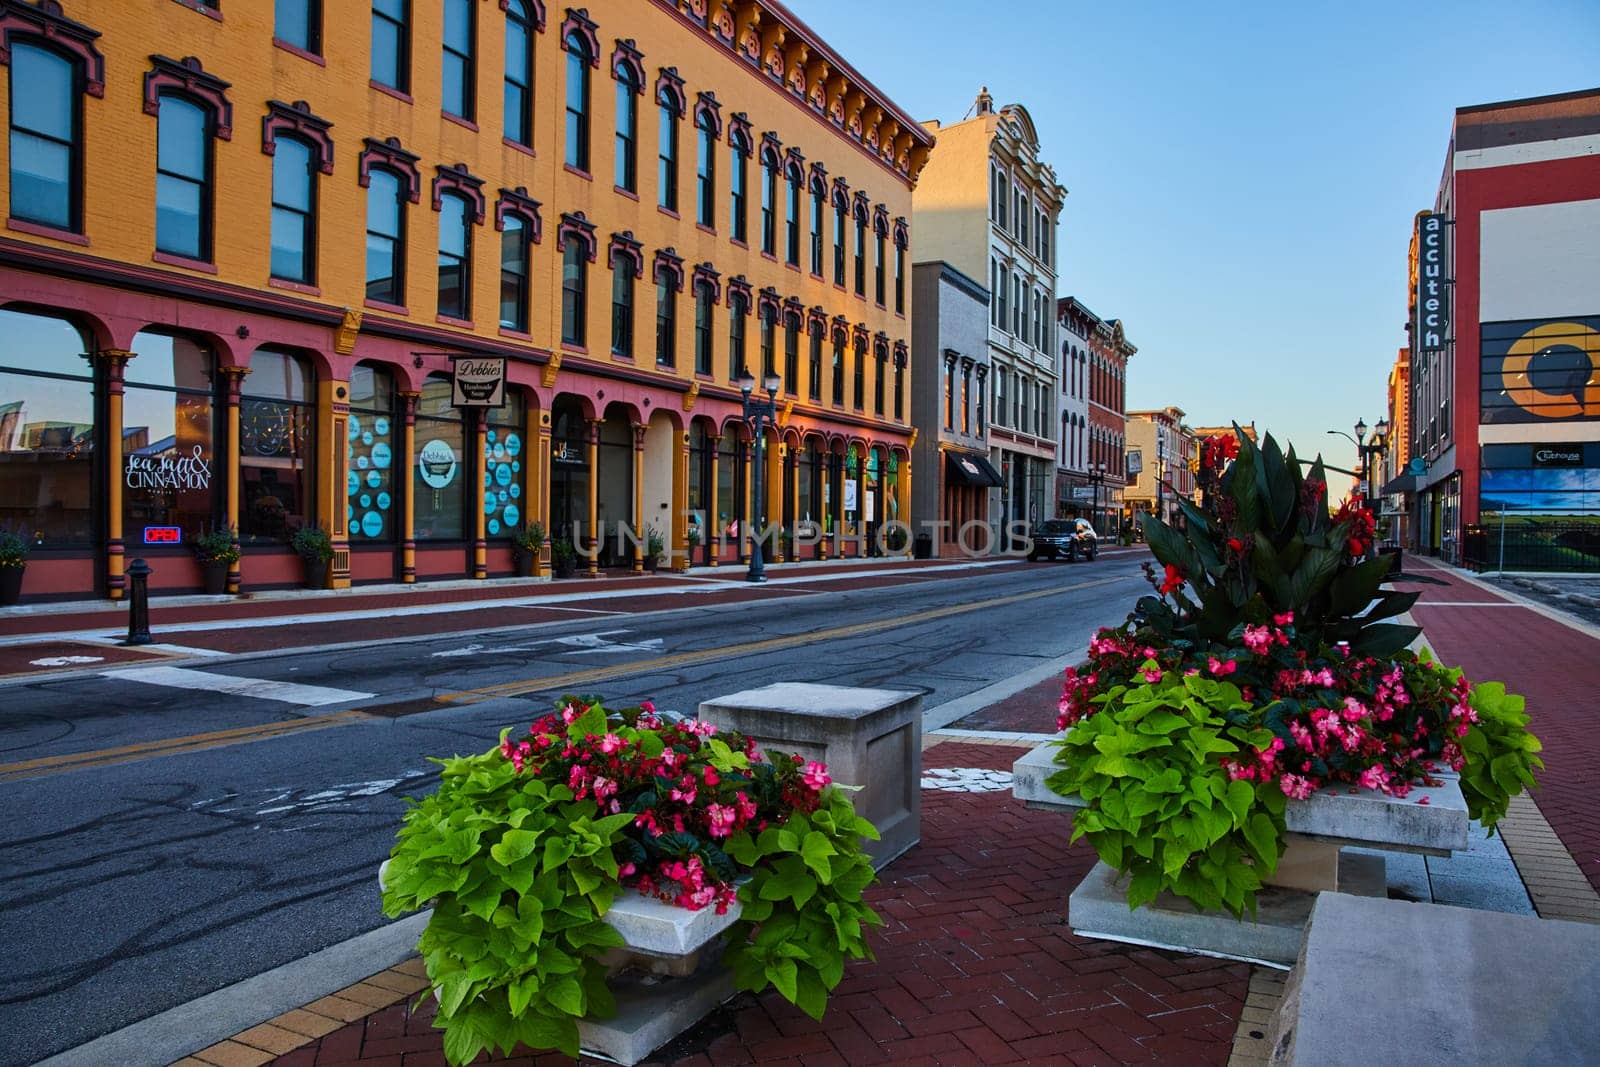 Golden hour sunrise over historic Muncie, Indiana downtown with vibrant flower planters and classic architecture